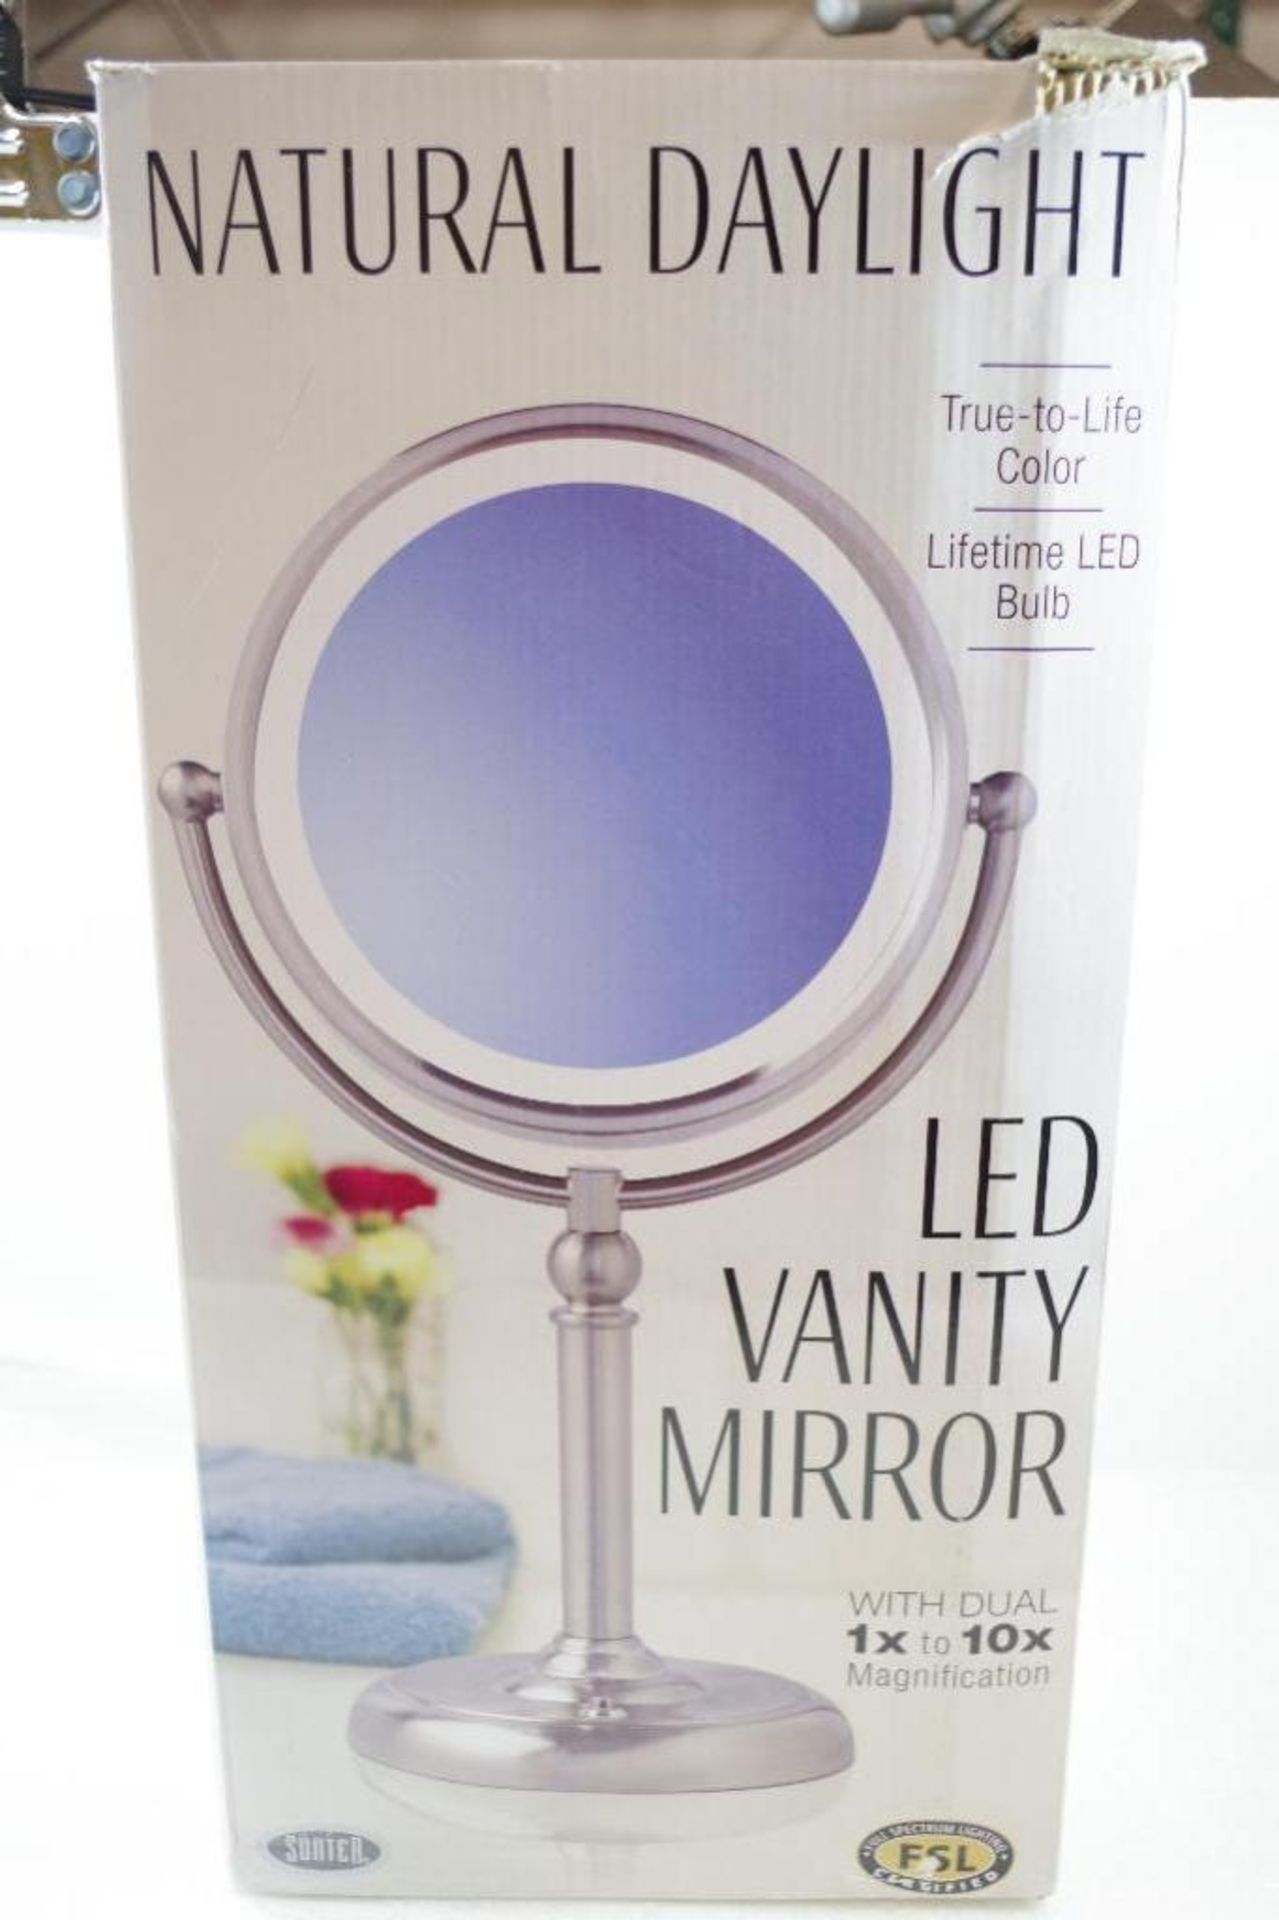 LED Vanity Mirror, Magnification 1x to 10x - Image 2 of 3